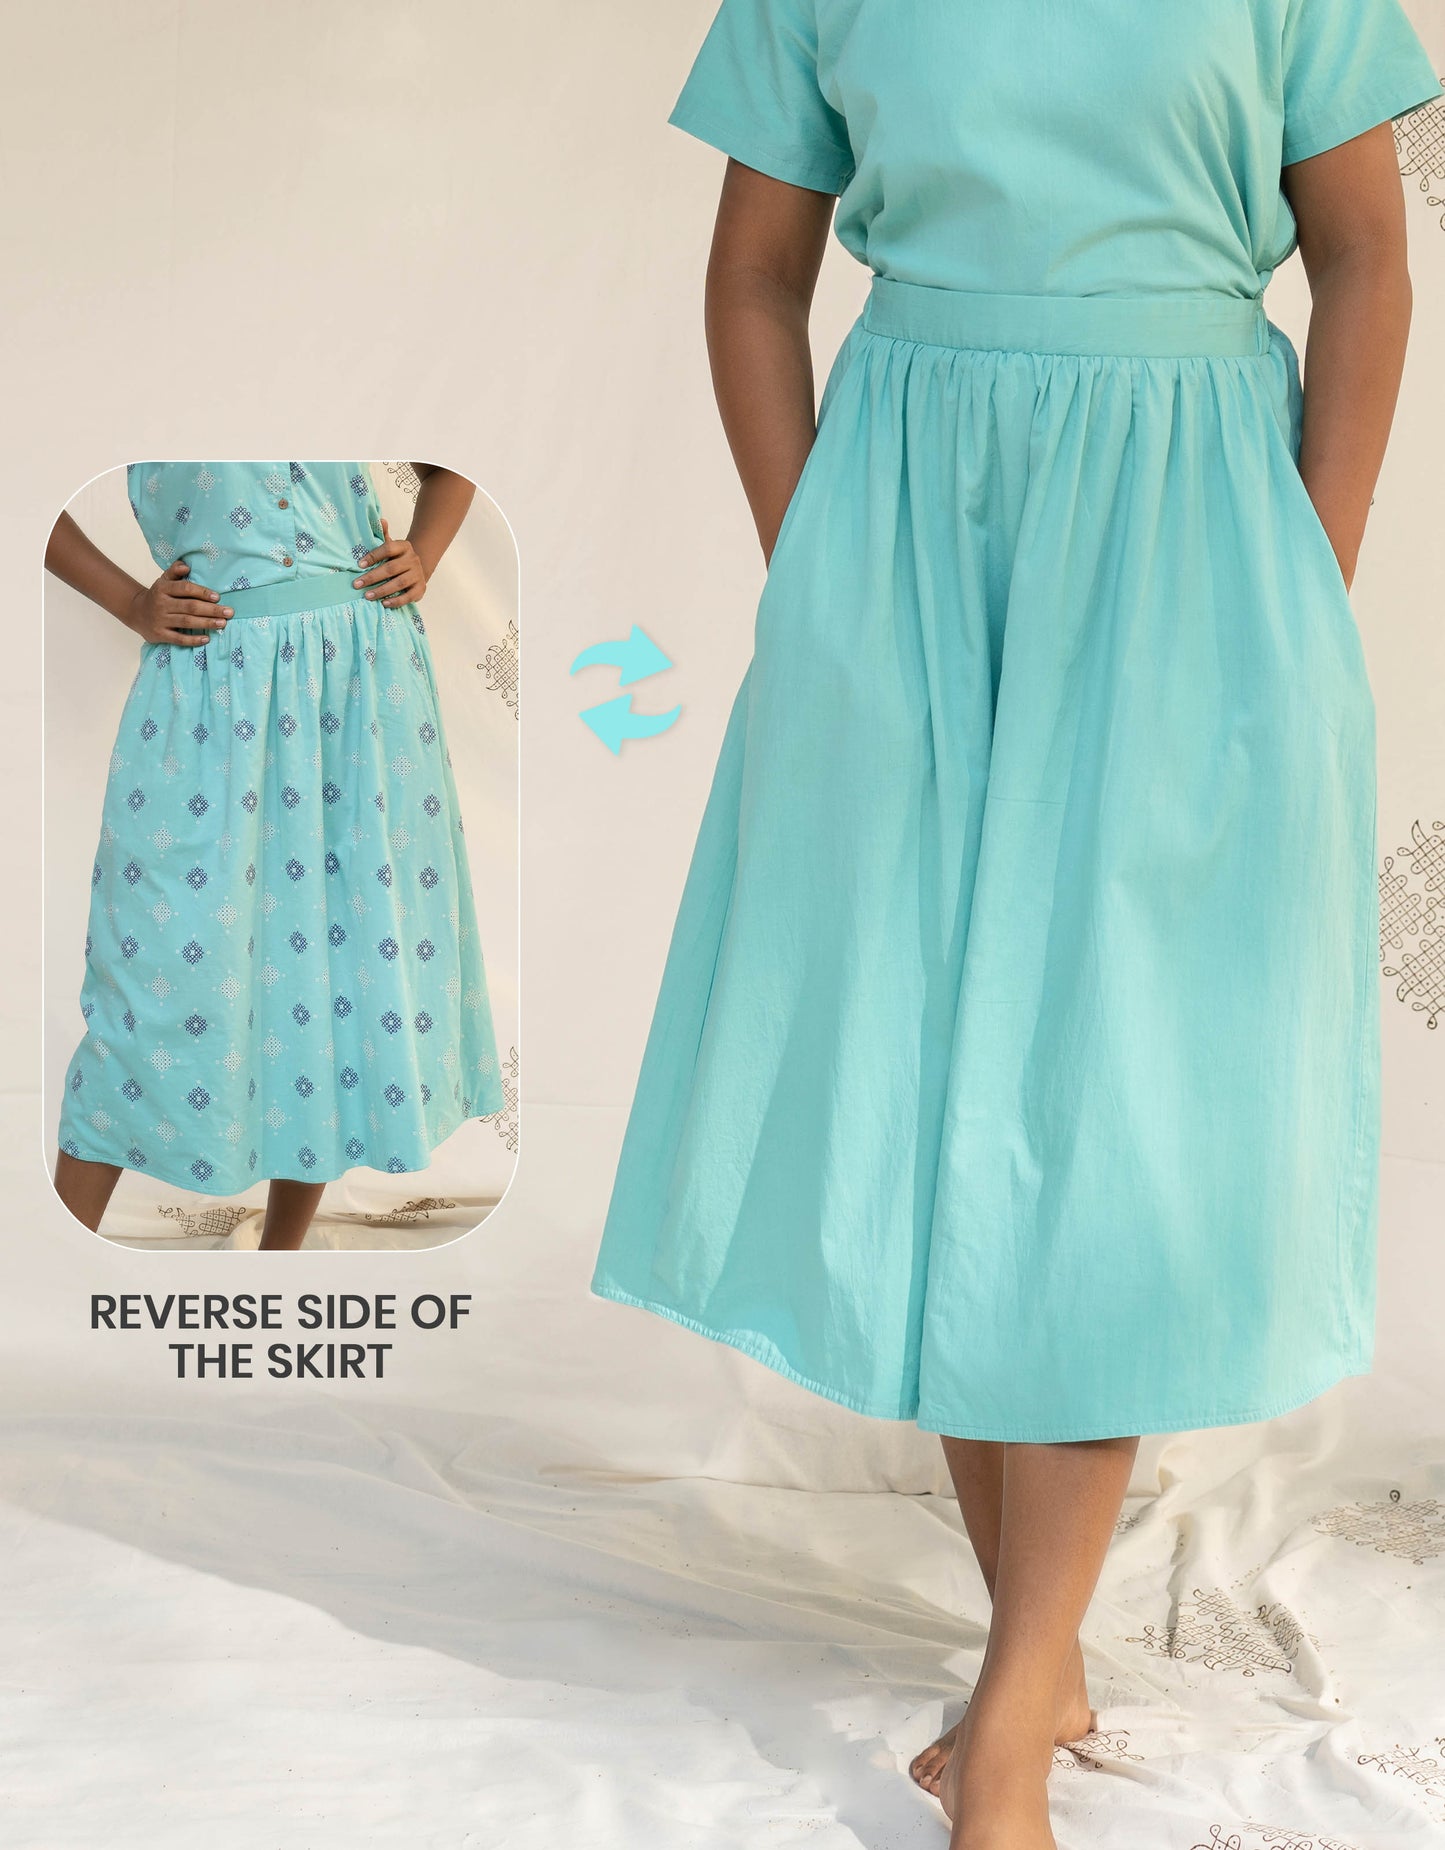 Front view of Hueloom's Reversible Midi Skirt in Mint blue showing versatile reversible option with  Kolam print